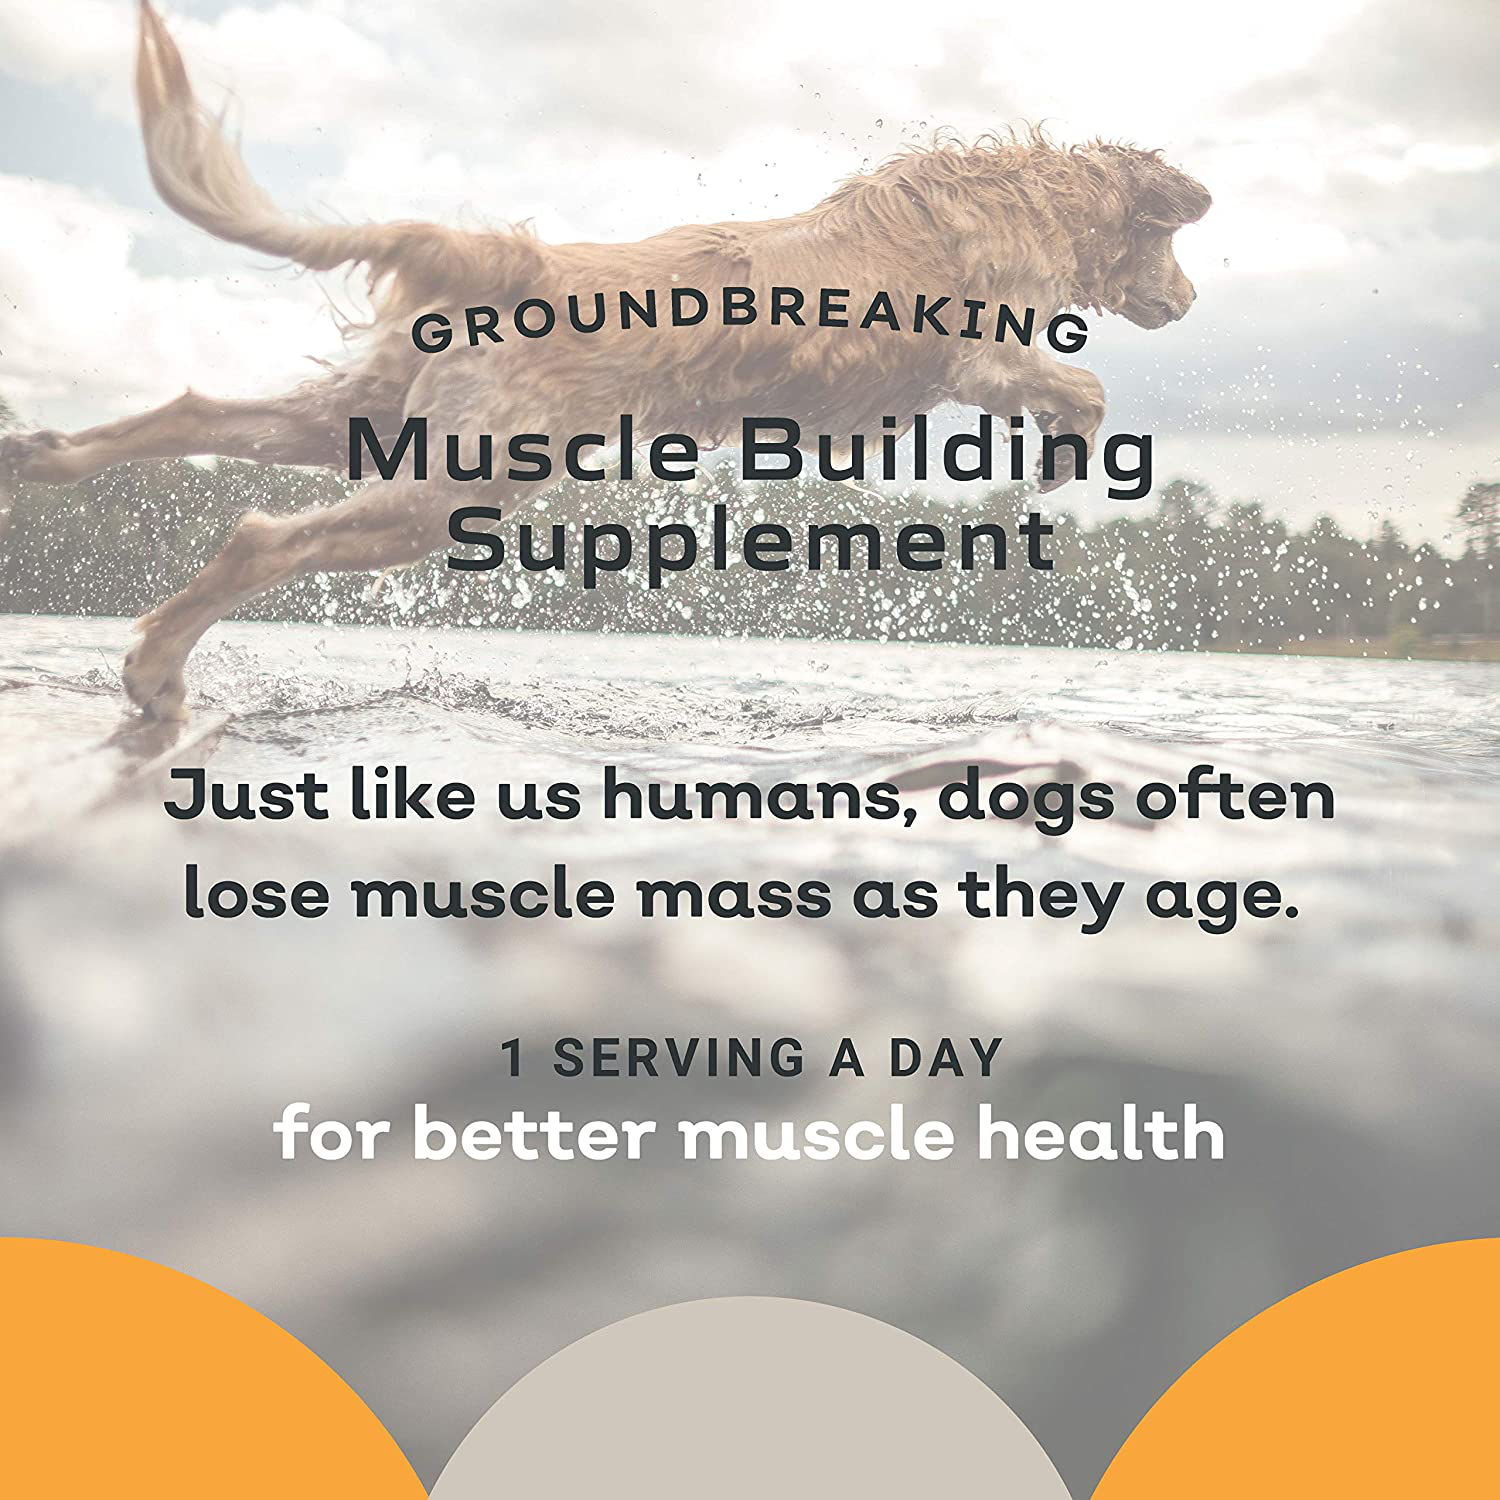 MYOS Canine Muscle Formula - Clinically Proven All-Natural Muscle Building Supplement - Reduce Muscle Loss in Aging Dogs